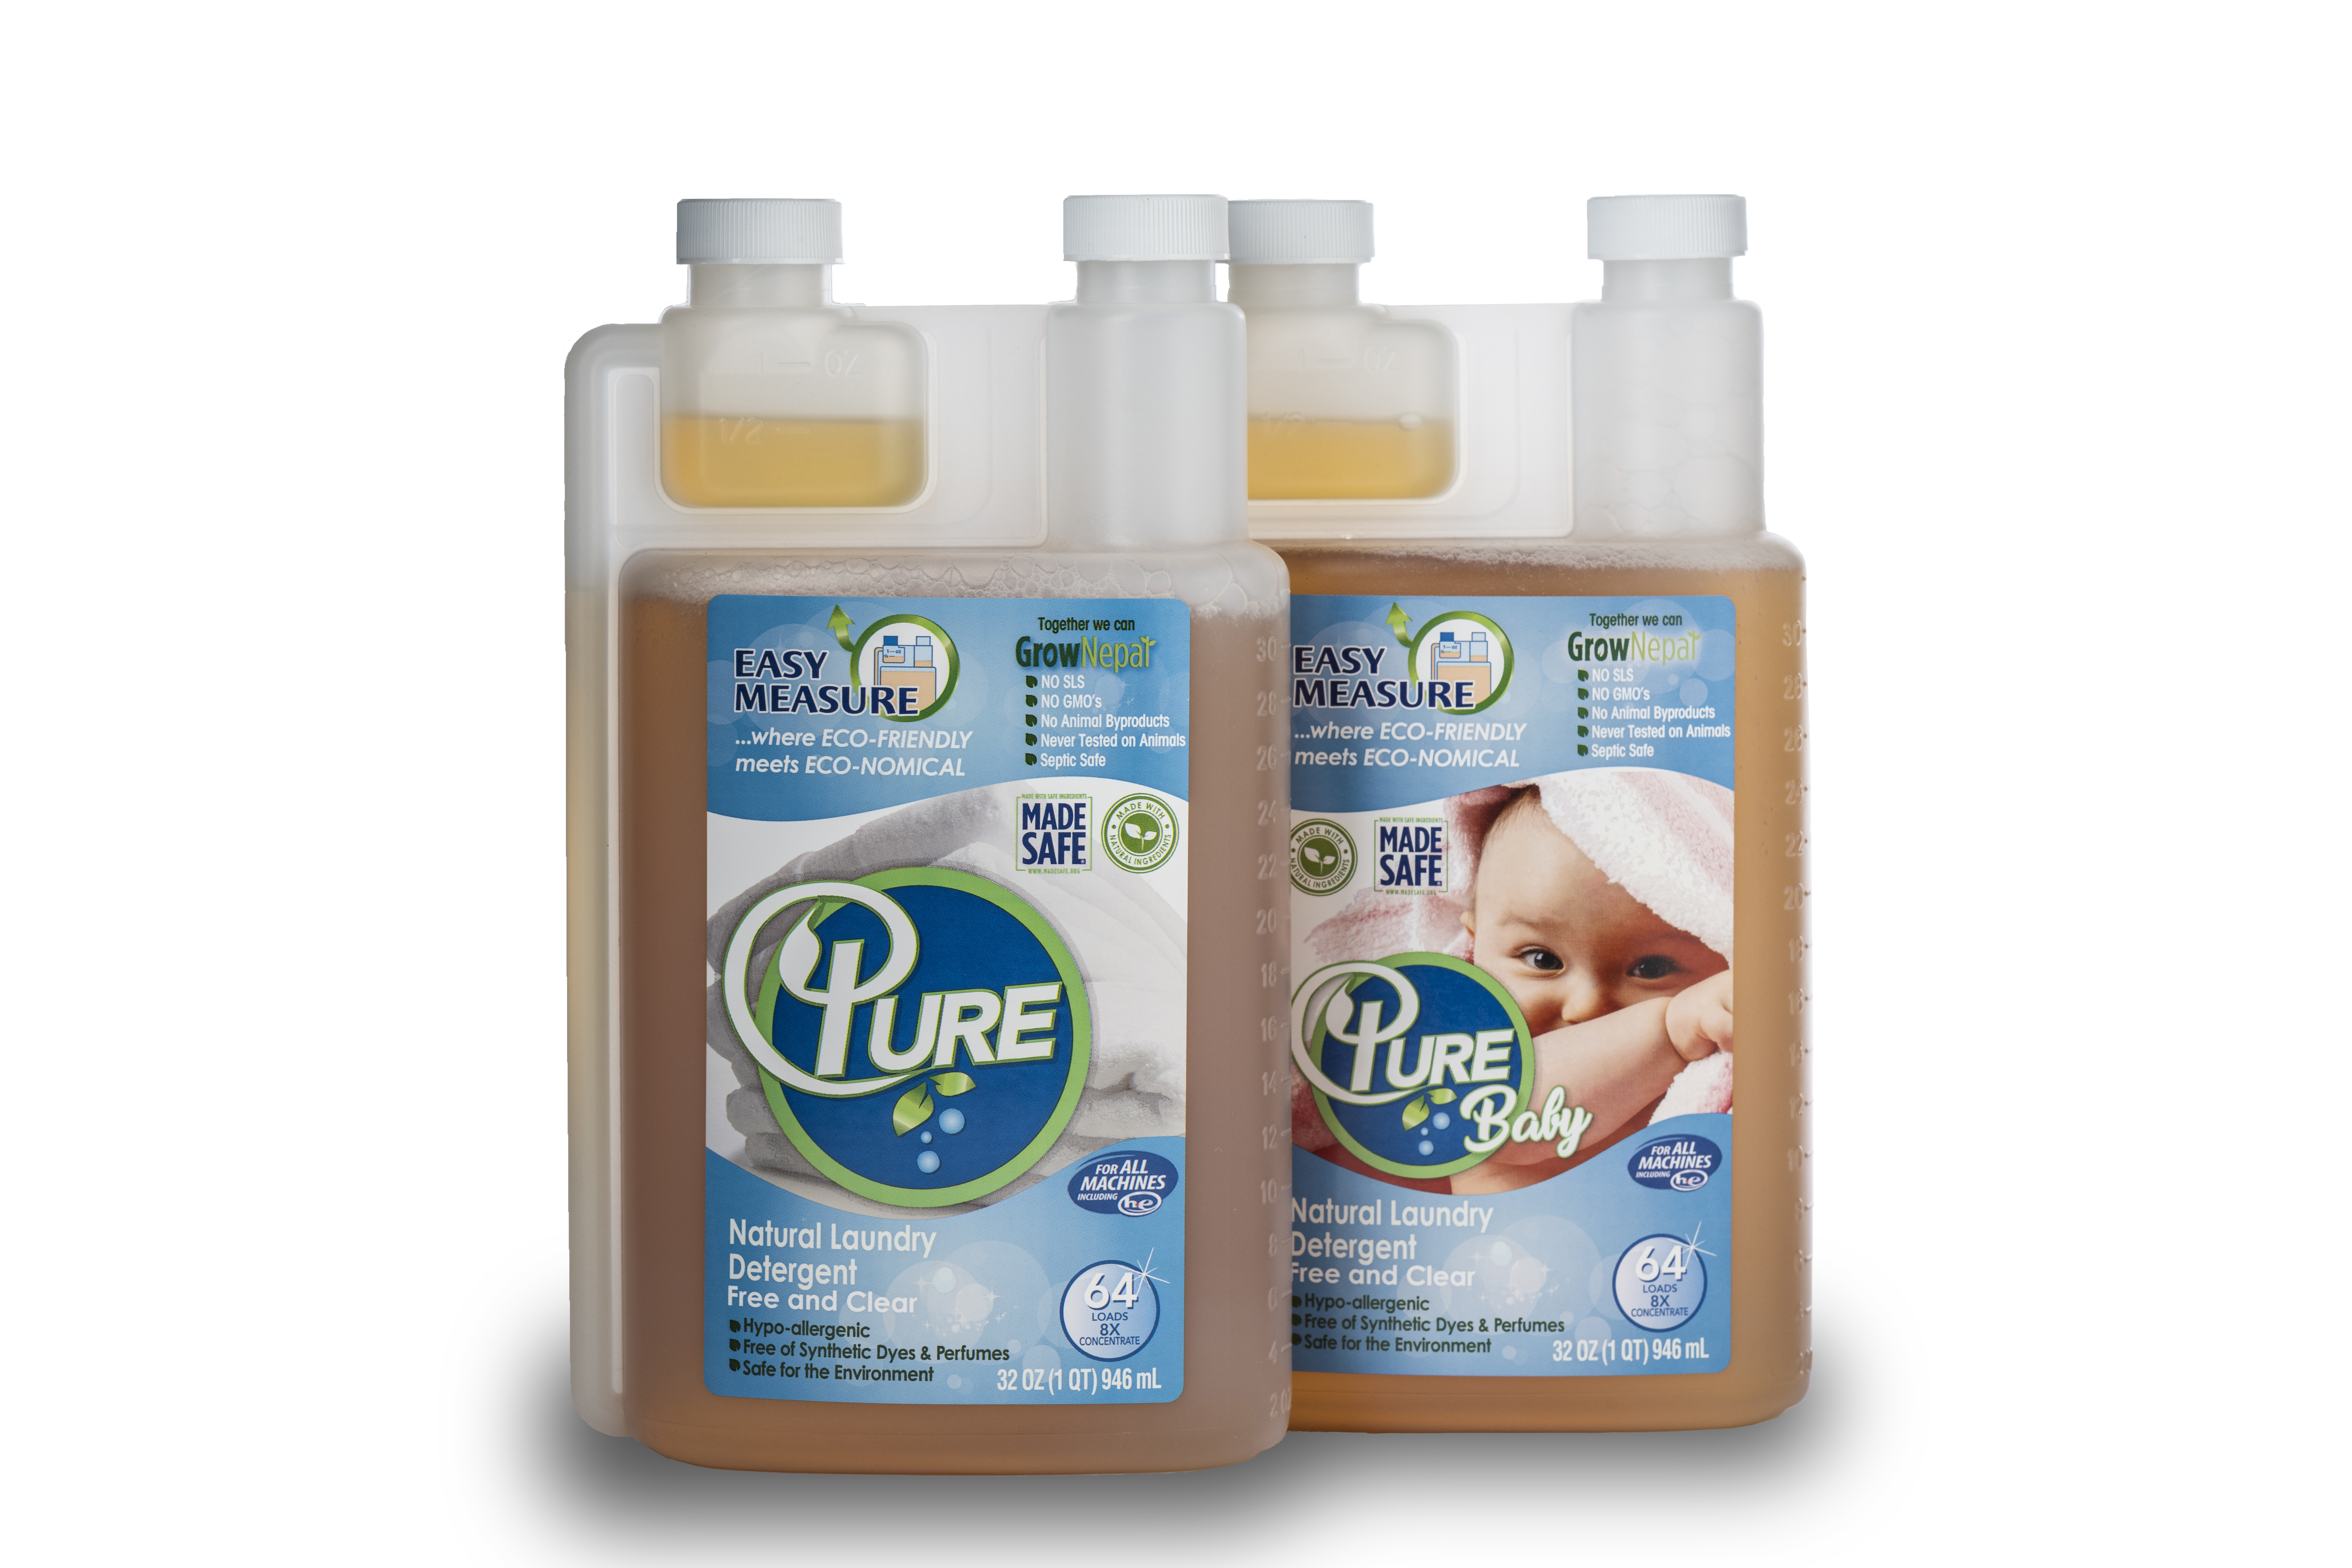 Why Use a Non-Toxic (Natural) Laundry Detergent? PURE Natural Laundry Detergent and PURE Baby